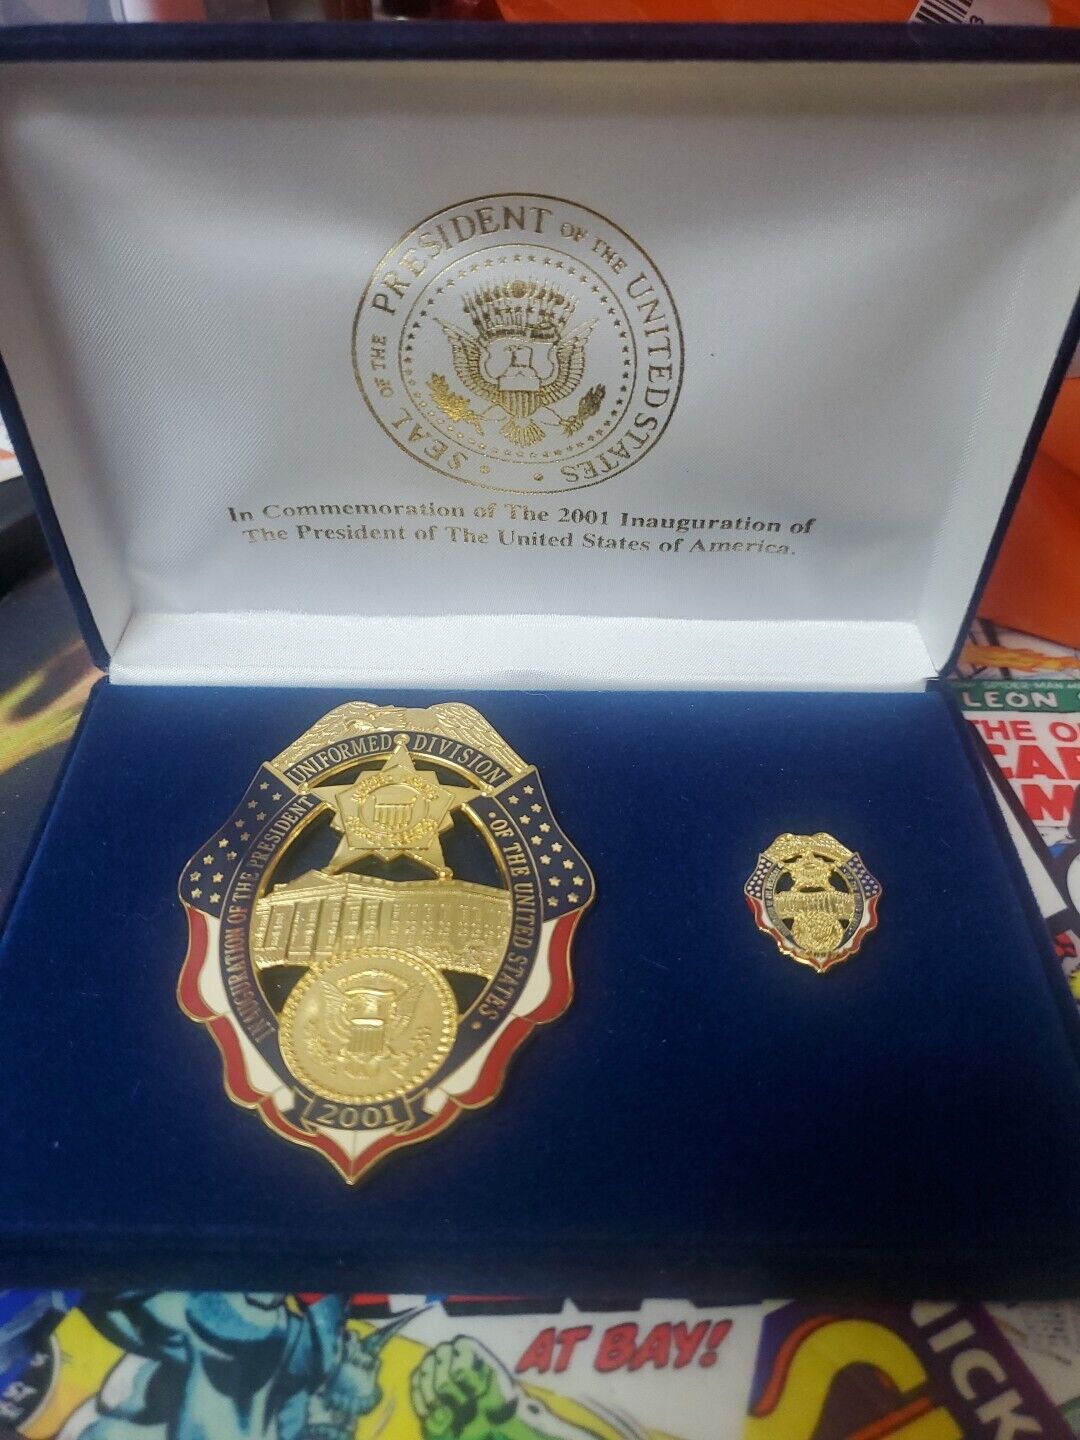 2001 Presidential Inaugeration Uniform Division Badge And Pin In Case